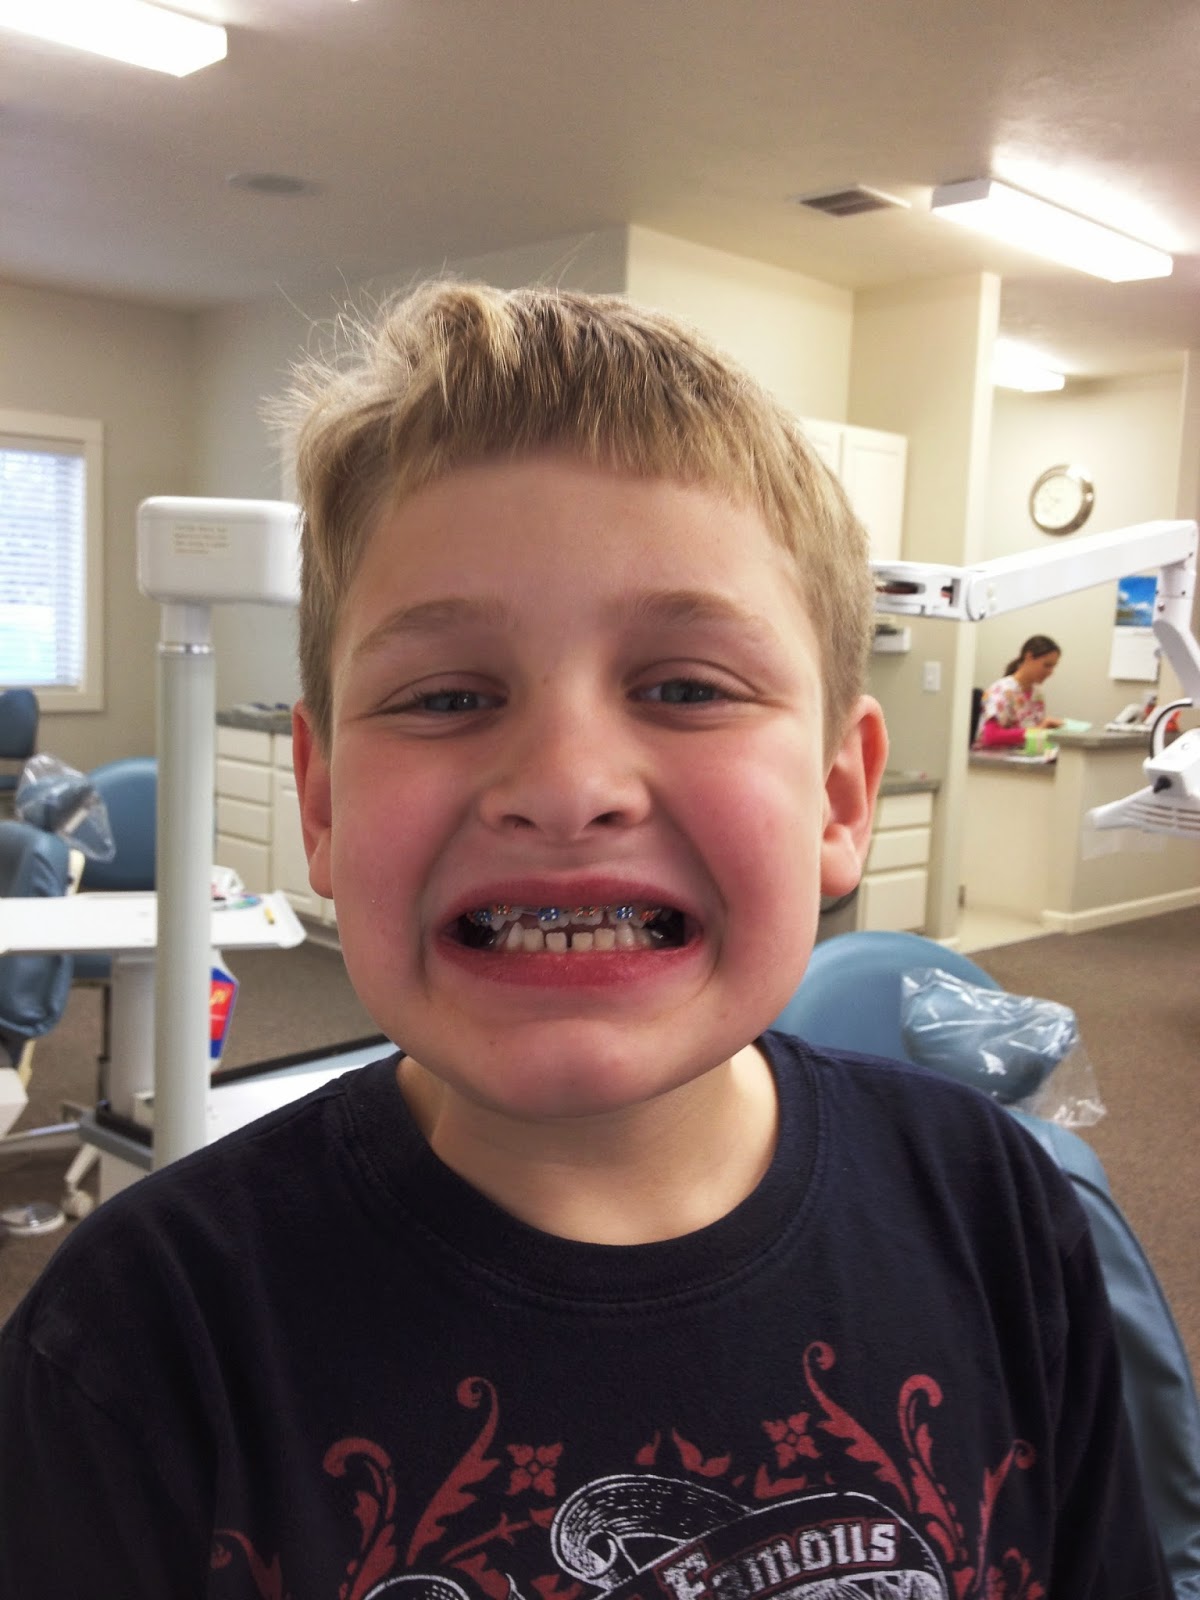 The Talbots Look Who Got Braces Now!